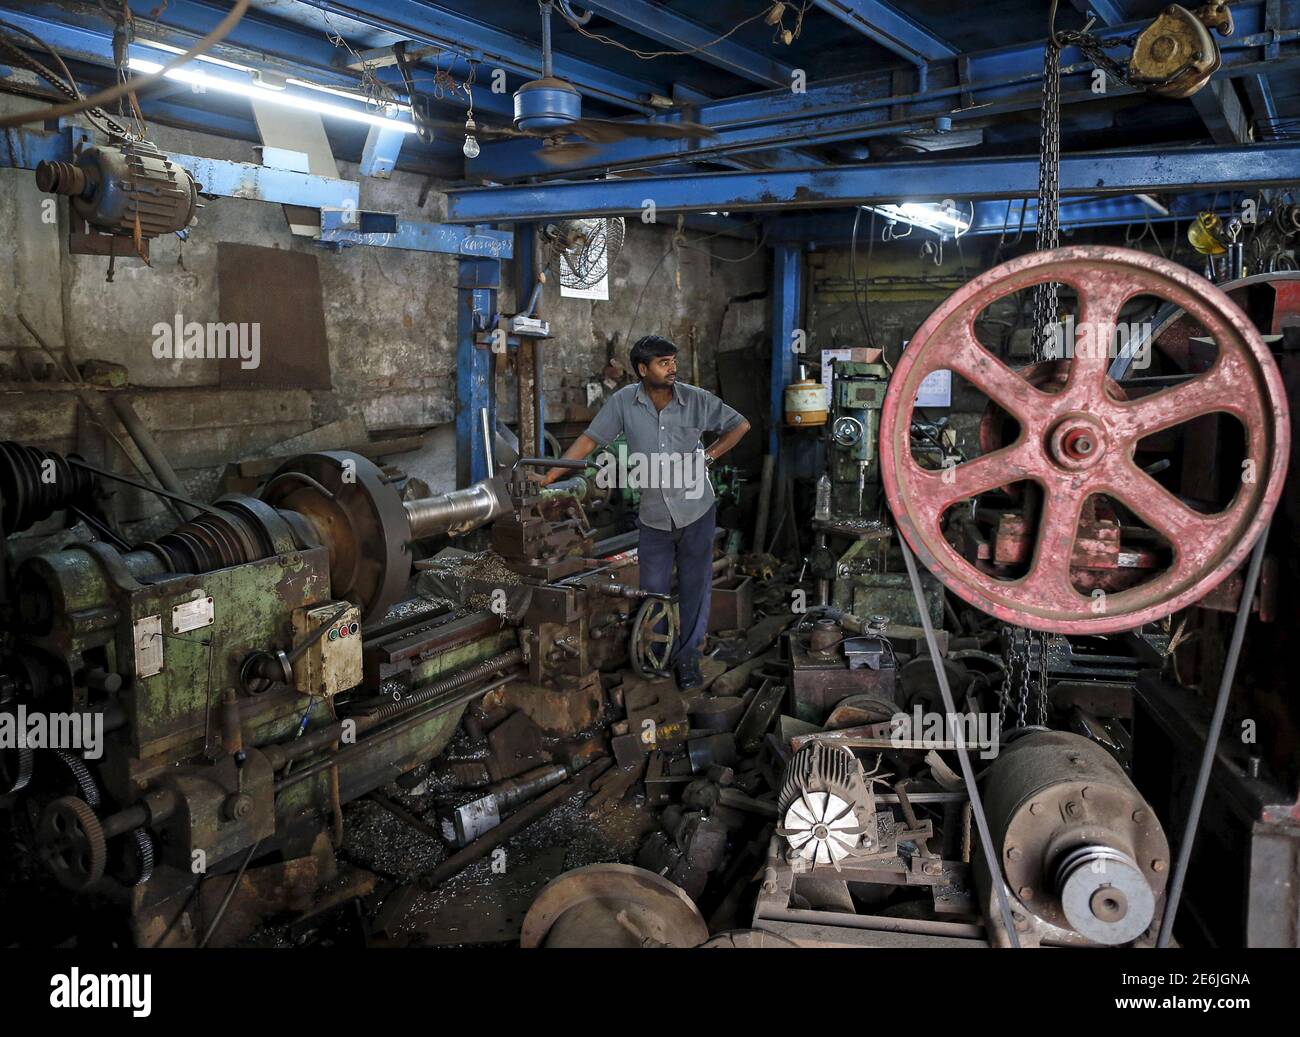 A worker looks on as he operates a machine making gear parts for cranes, inside a workshop in an industrial area in Mumbai, India, January 12, 2016.  India's annual industrial output contracted 3.2 percent in November, government data showed on Tuesday. REUTERS/Danish Siddiqui Stock Photo